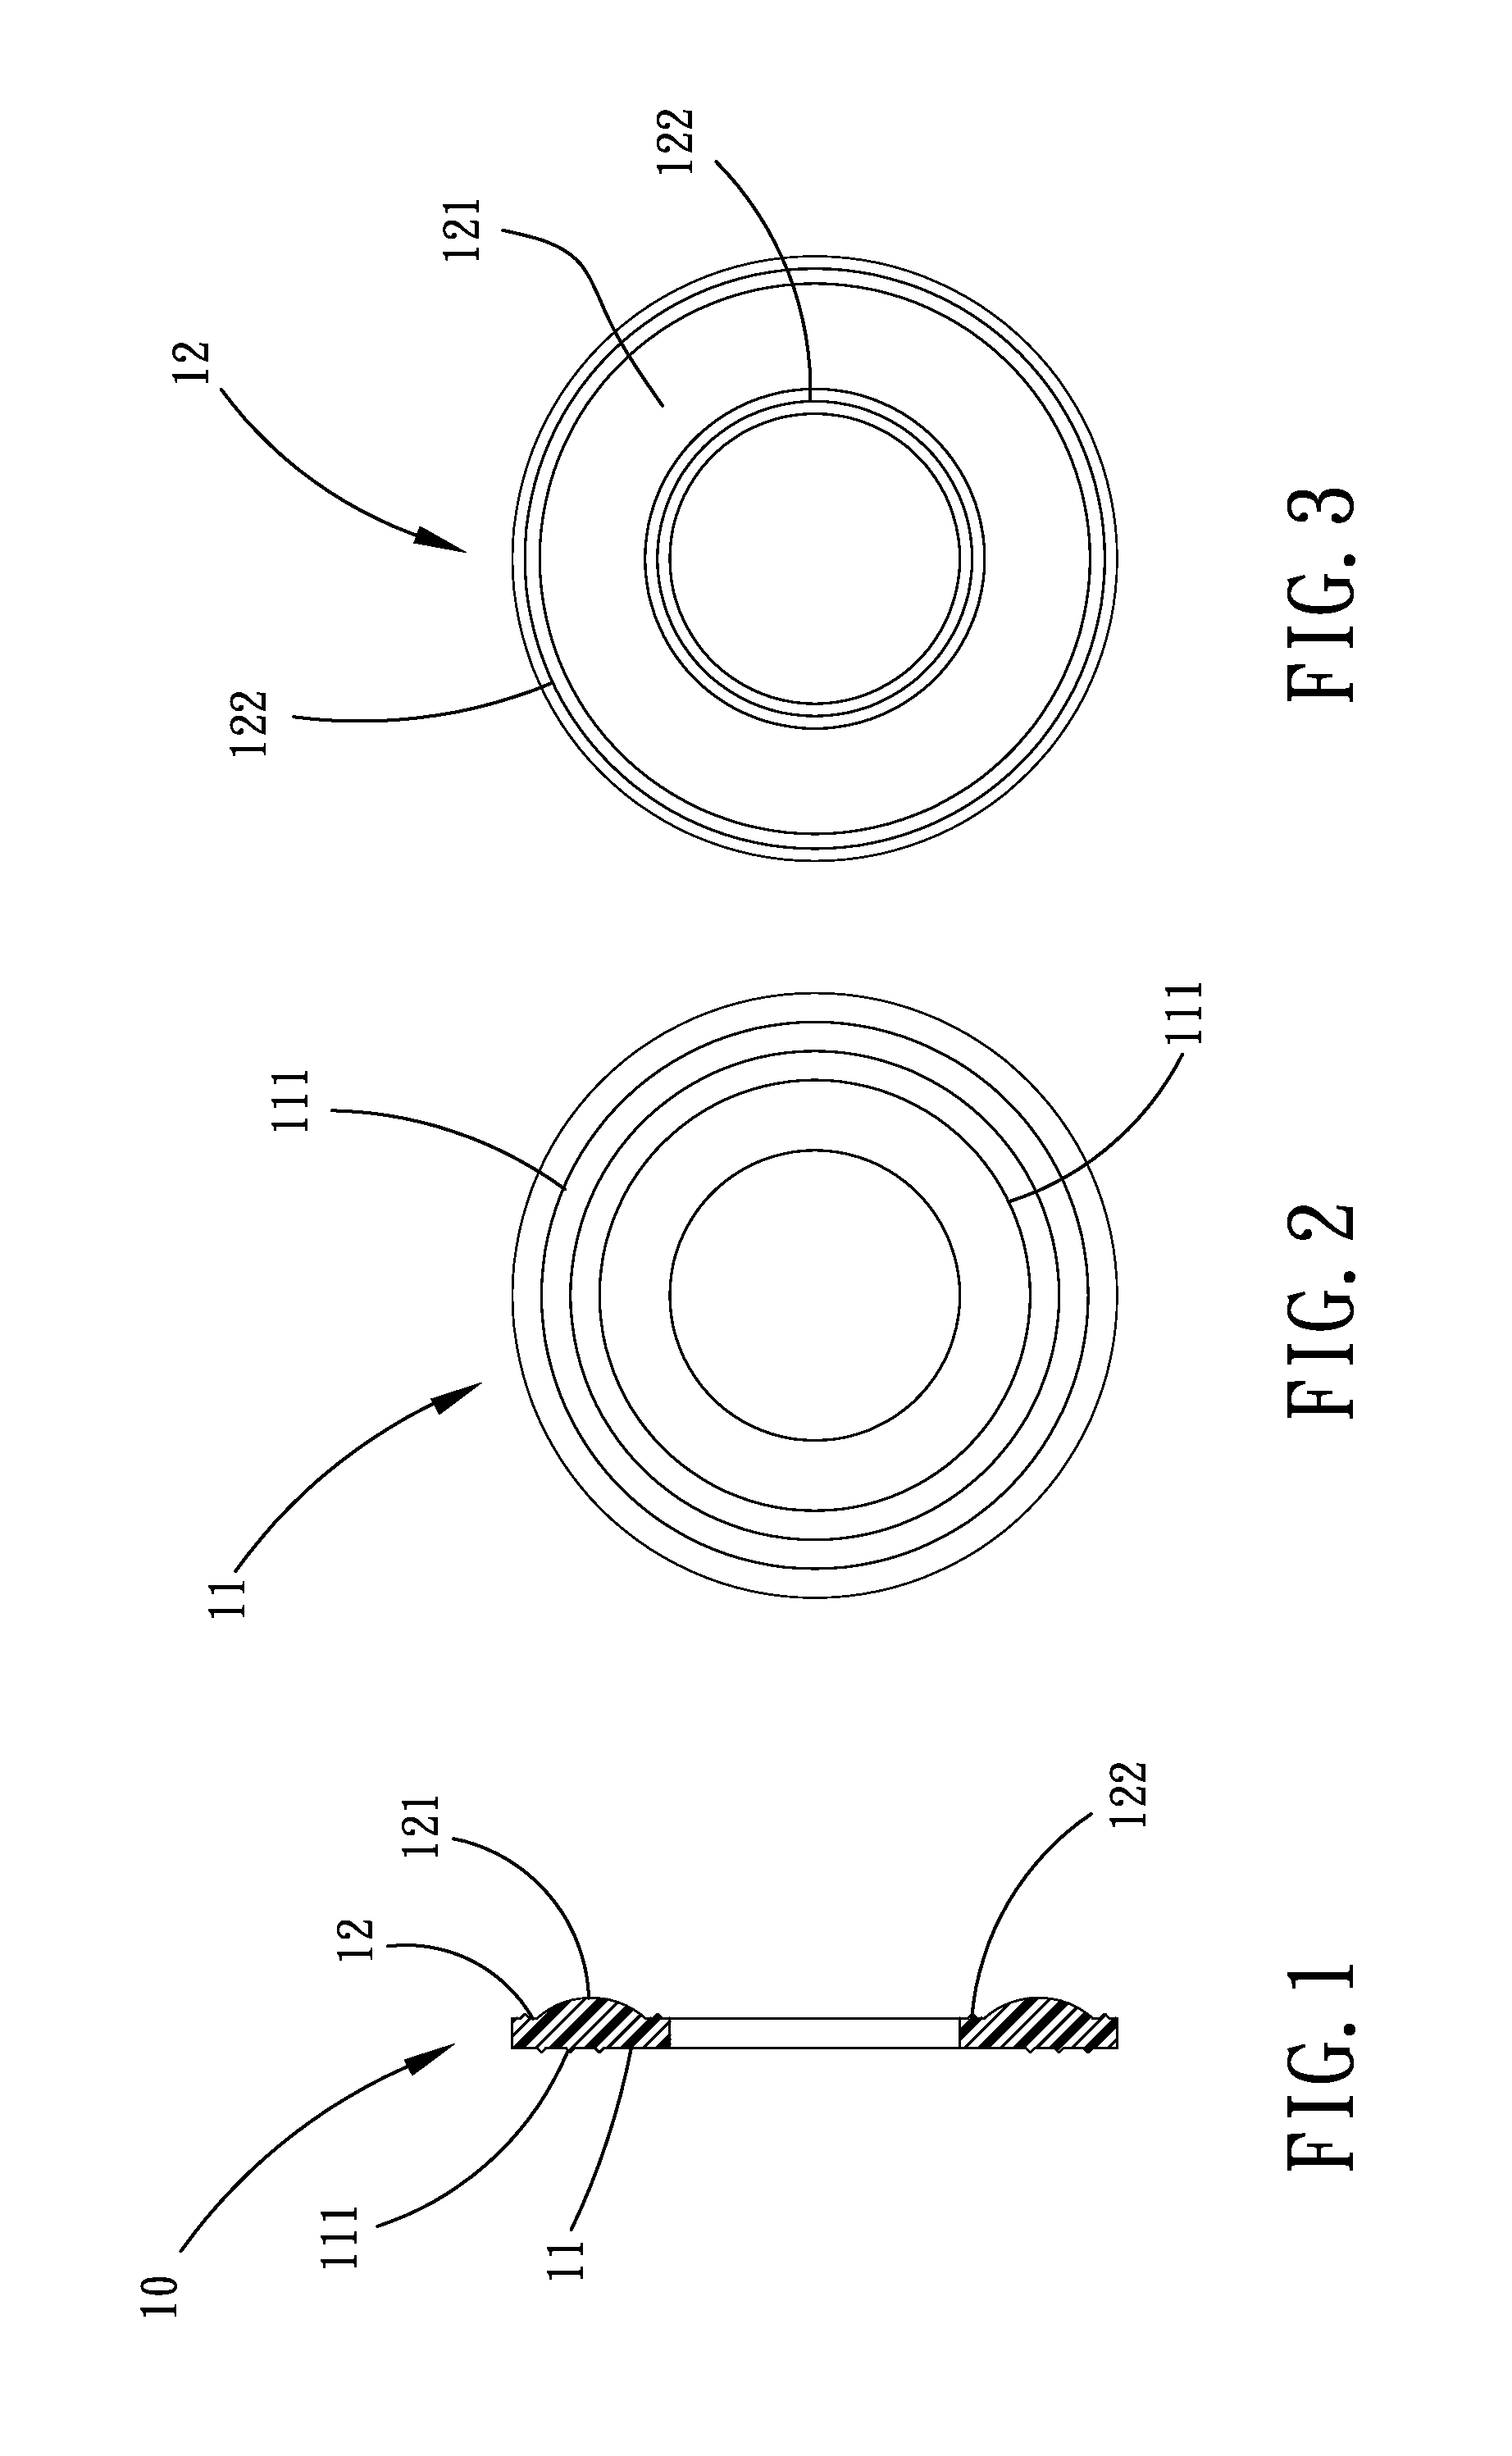 Cable gland and gasket ring assembly